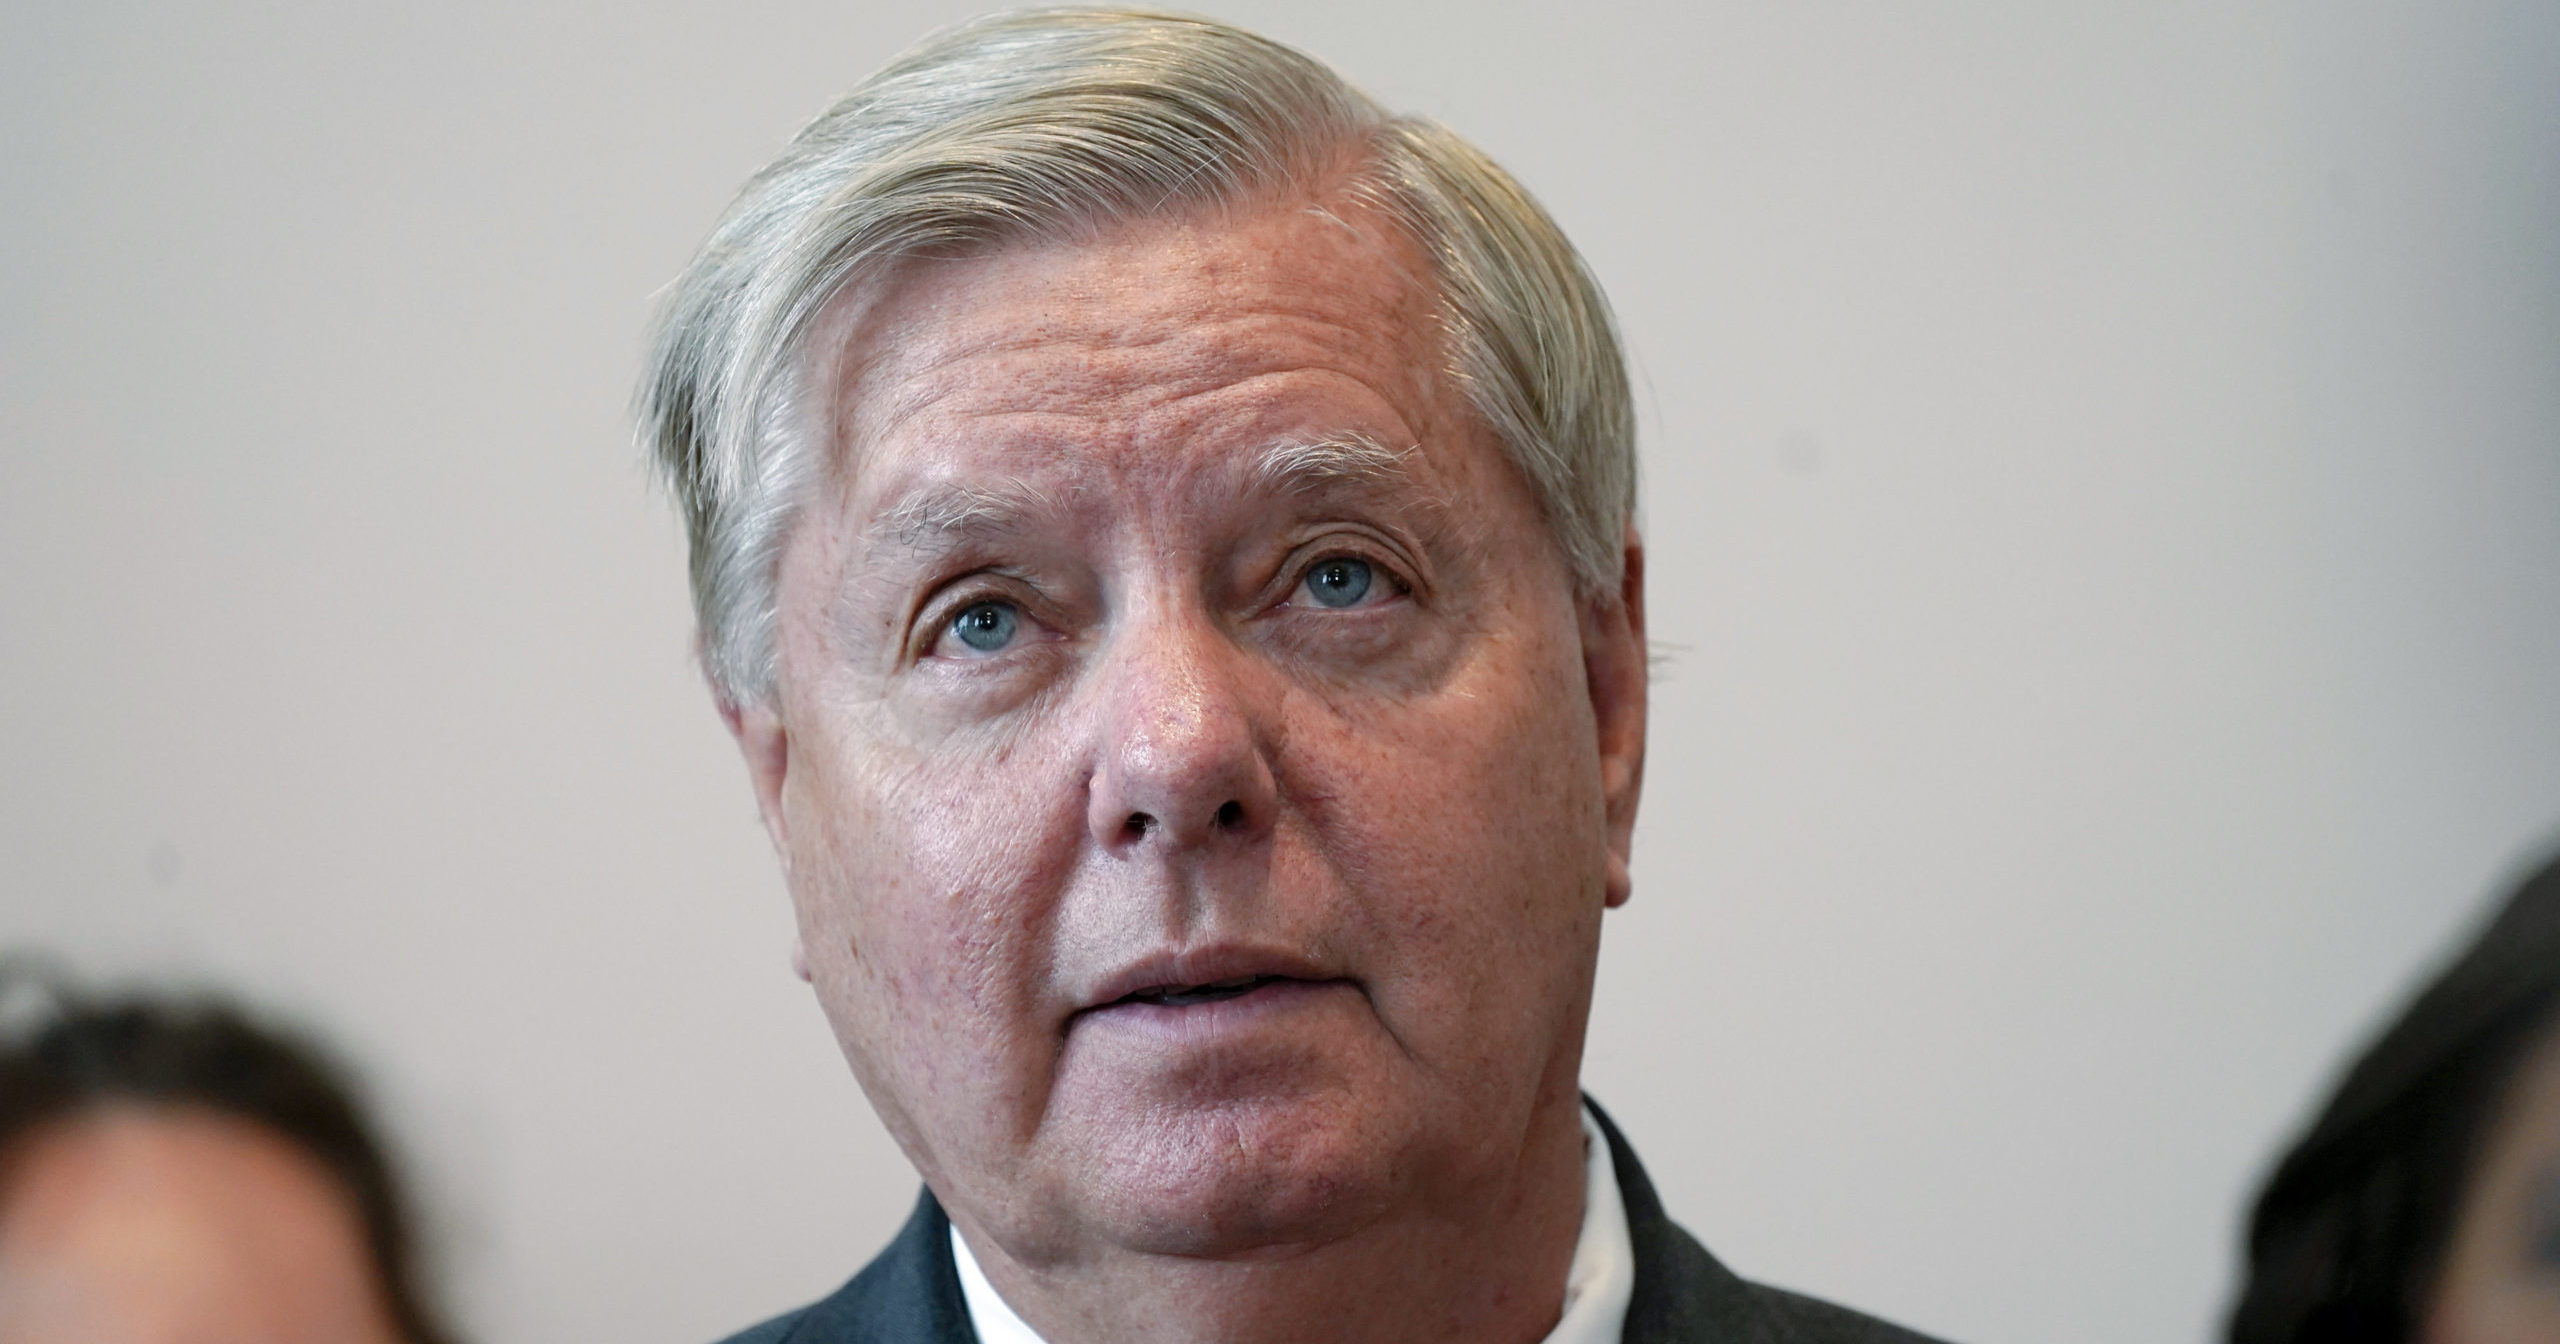 Republican Sen. Lindsey Graham speaks during a news conference on Capitol Hill in Washington, D.C., on Sept. 13.